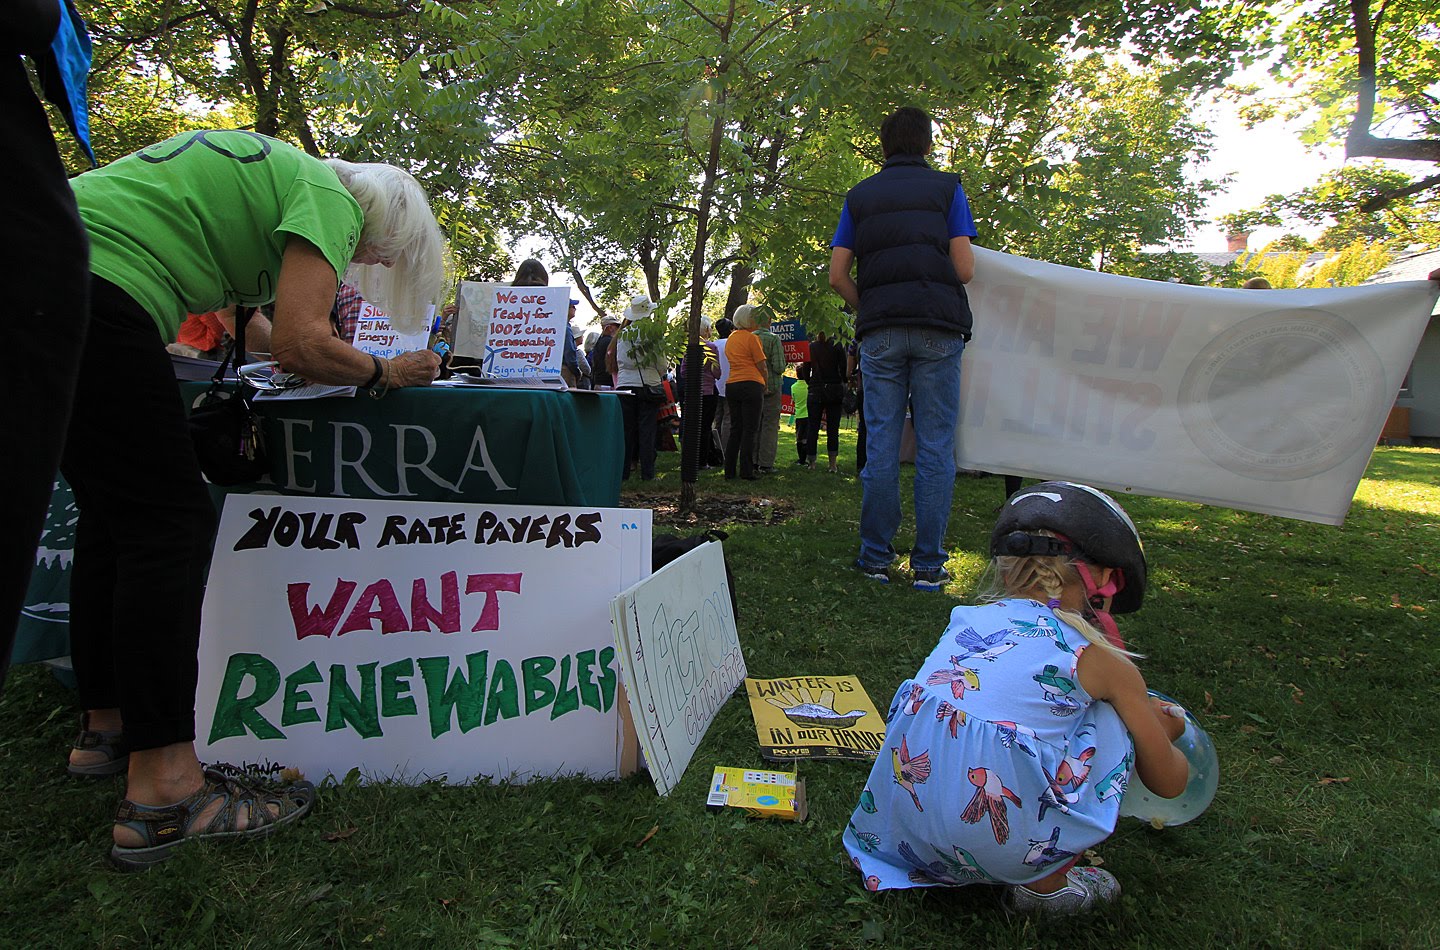 A small child crouches on the grass next to a sign reading "Your Ratepayers Want Renewables" while a group of people stand at a rally in the background.